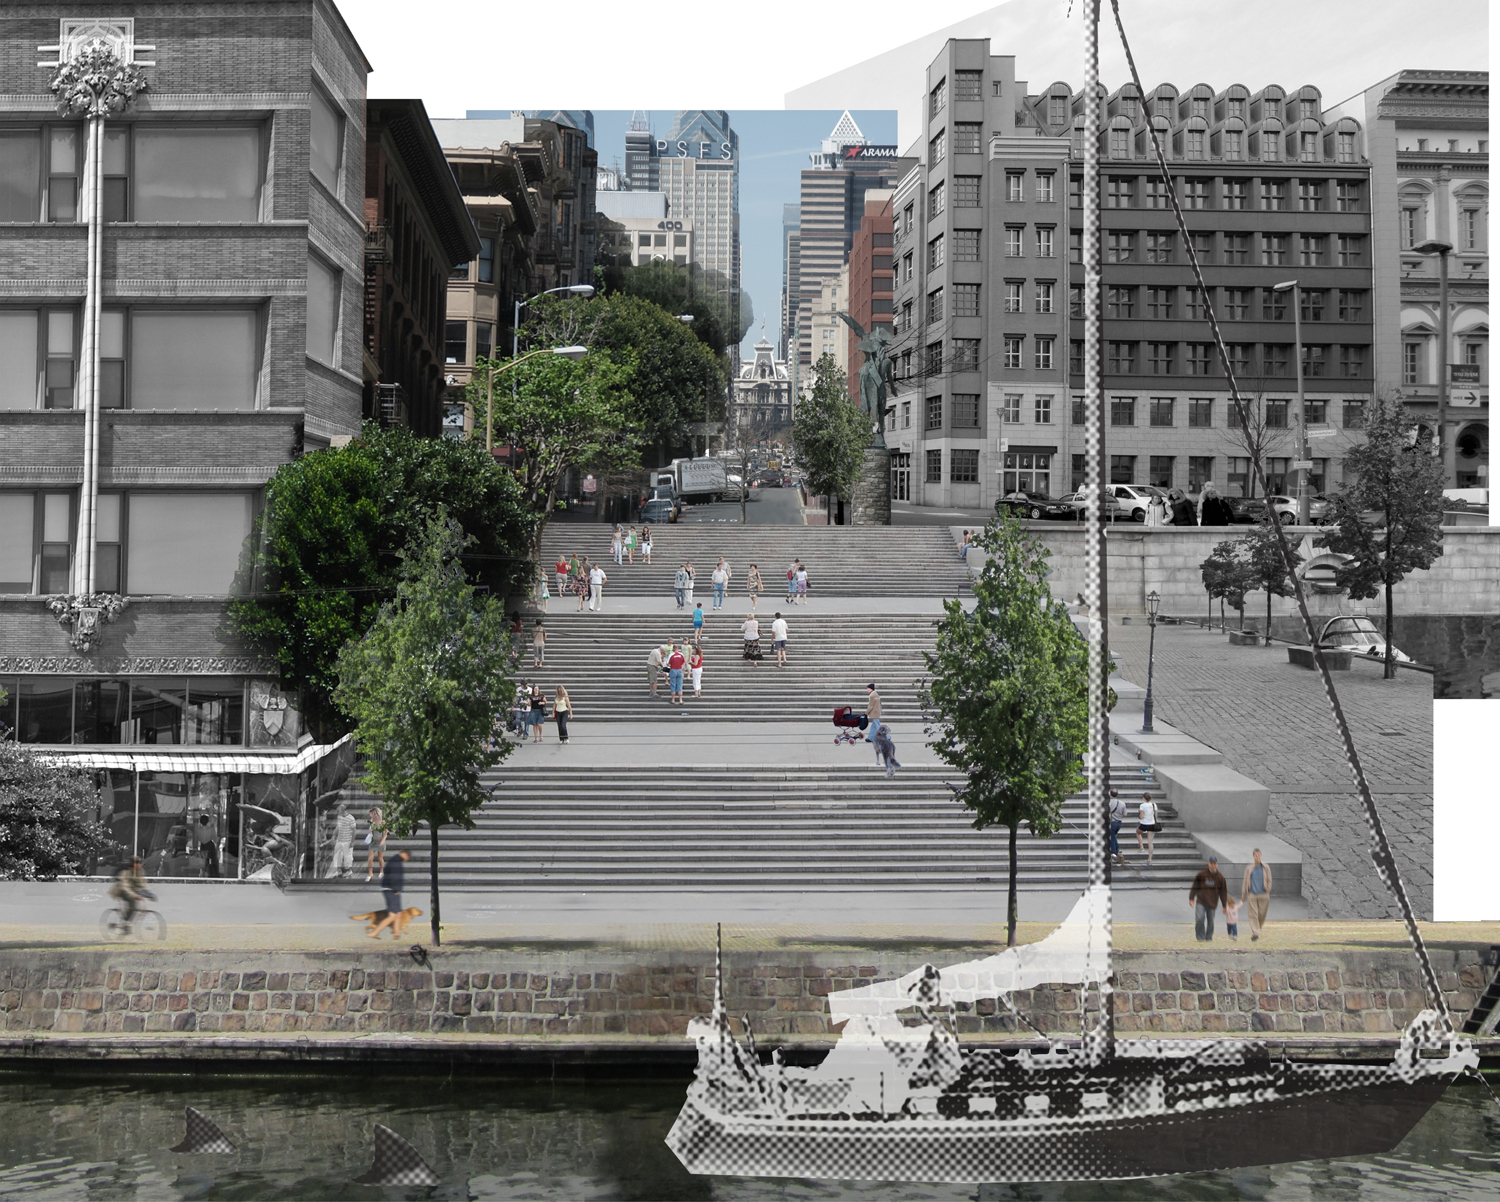 A vision for Penn's Landing from 'Float Your Boat,' the winning design entry from this year's Ed Bacon Student Competition, rethinking the city's I-95 corridor. | designed by Clara